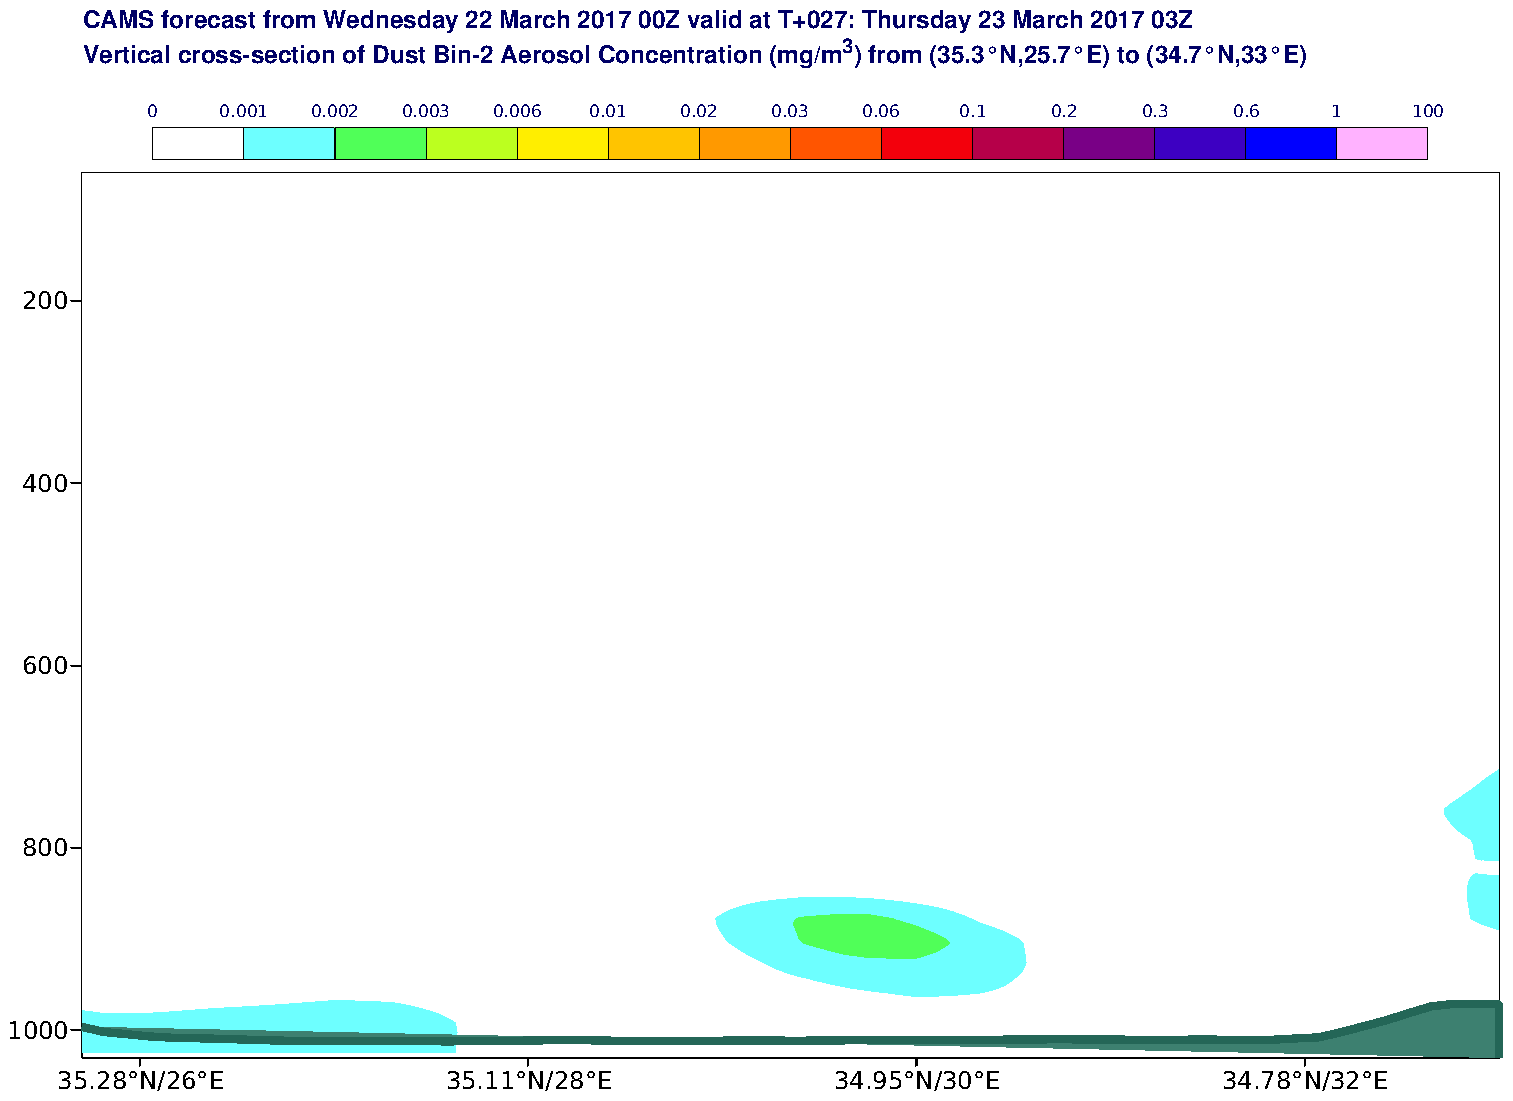 Vertical cross-section of Dust Bin-2 Aerosol Concentration (mg/m3) valid at T27 - 2017-03-23 03:00